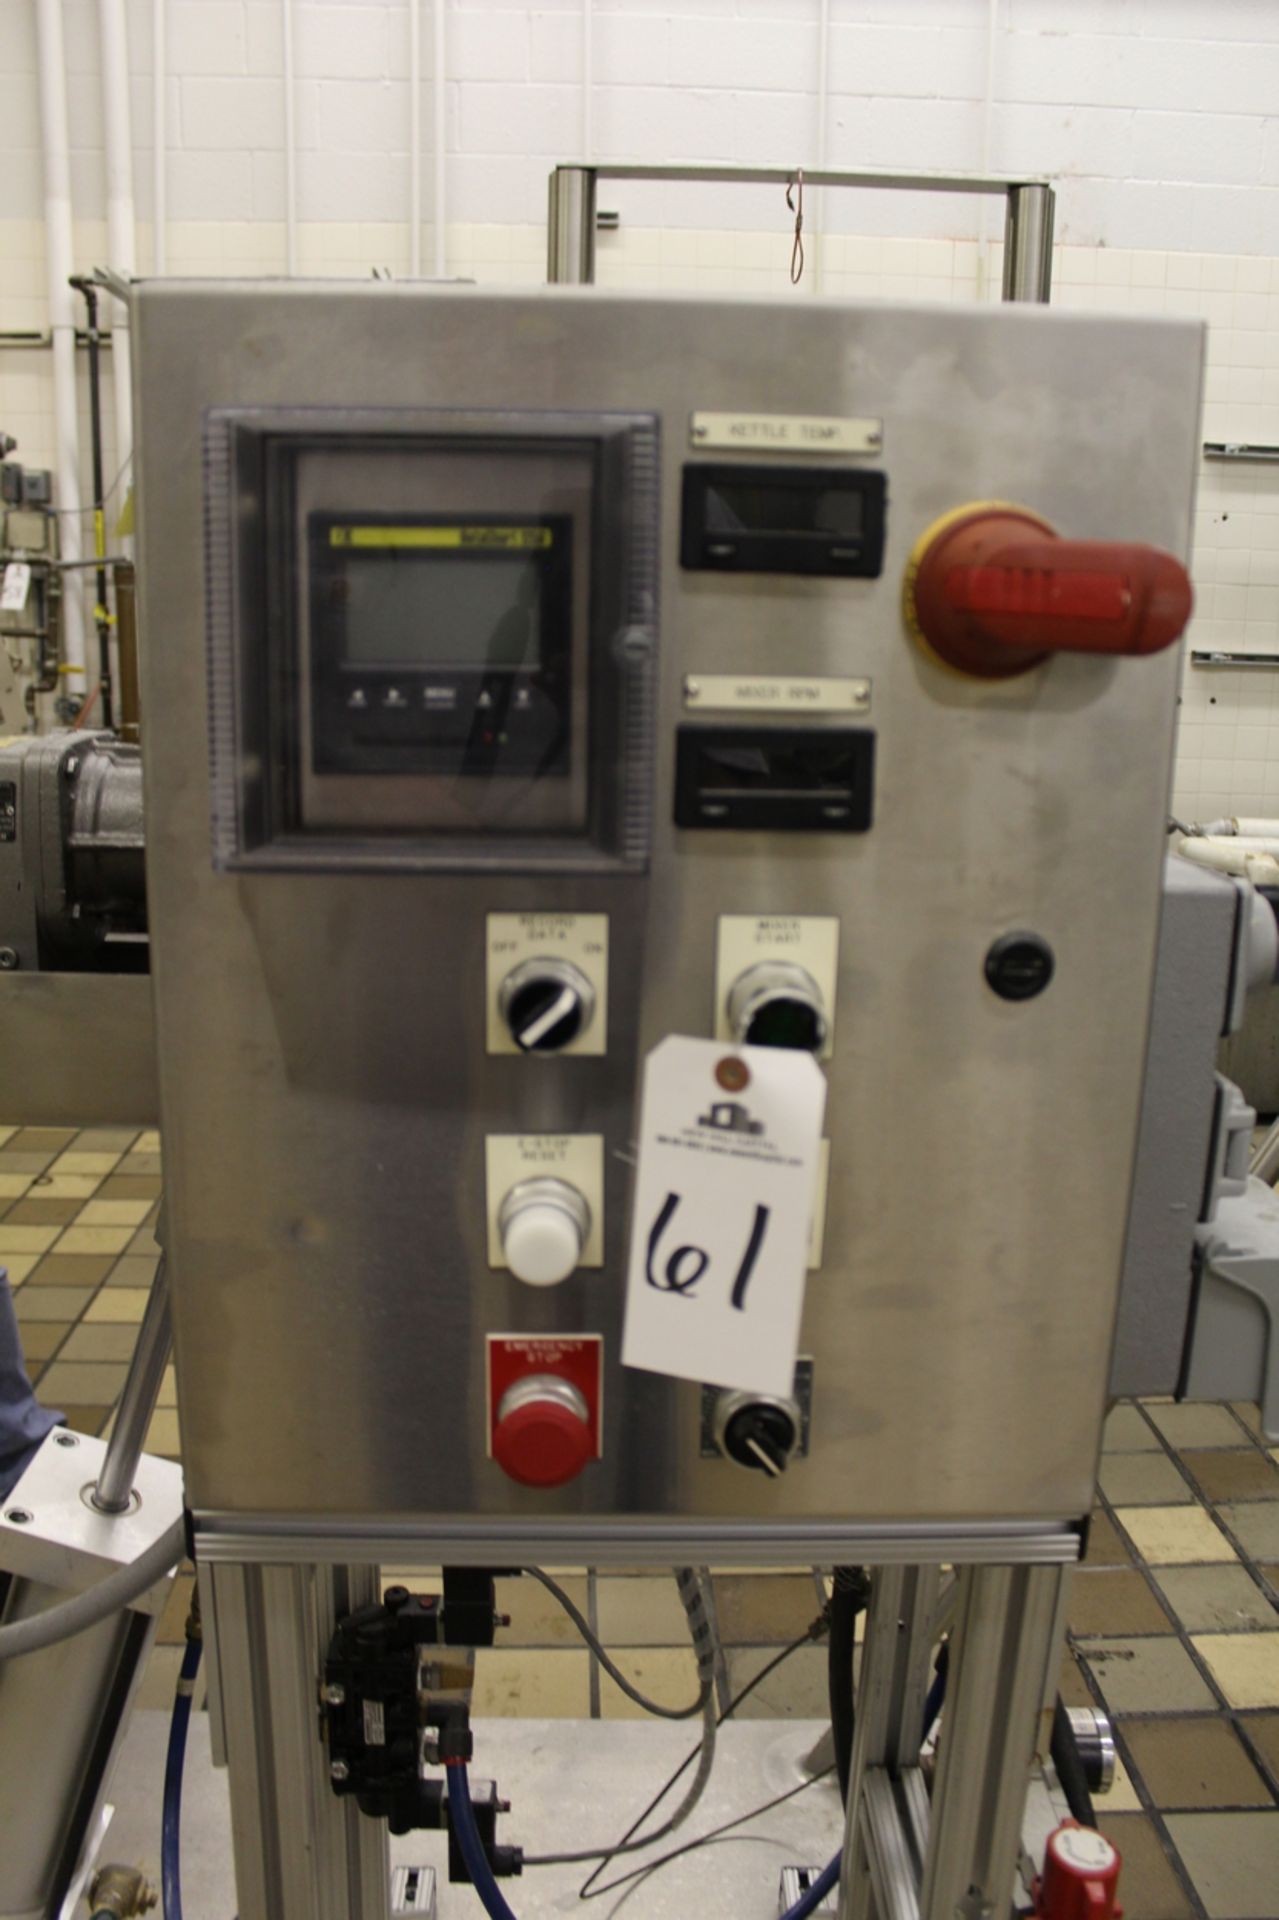 2006 Lee Pilot Kettle Skid With Model 1D9MT Kettle With Scrape Surface Tilt Out Agitator & Controls - Image 2 of 4